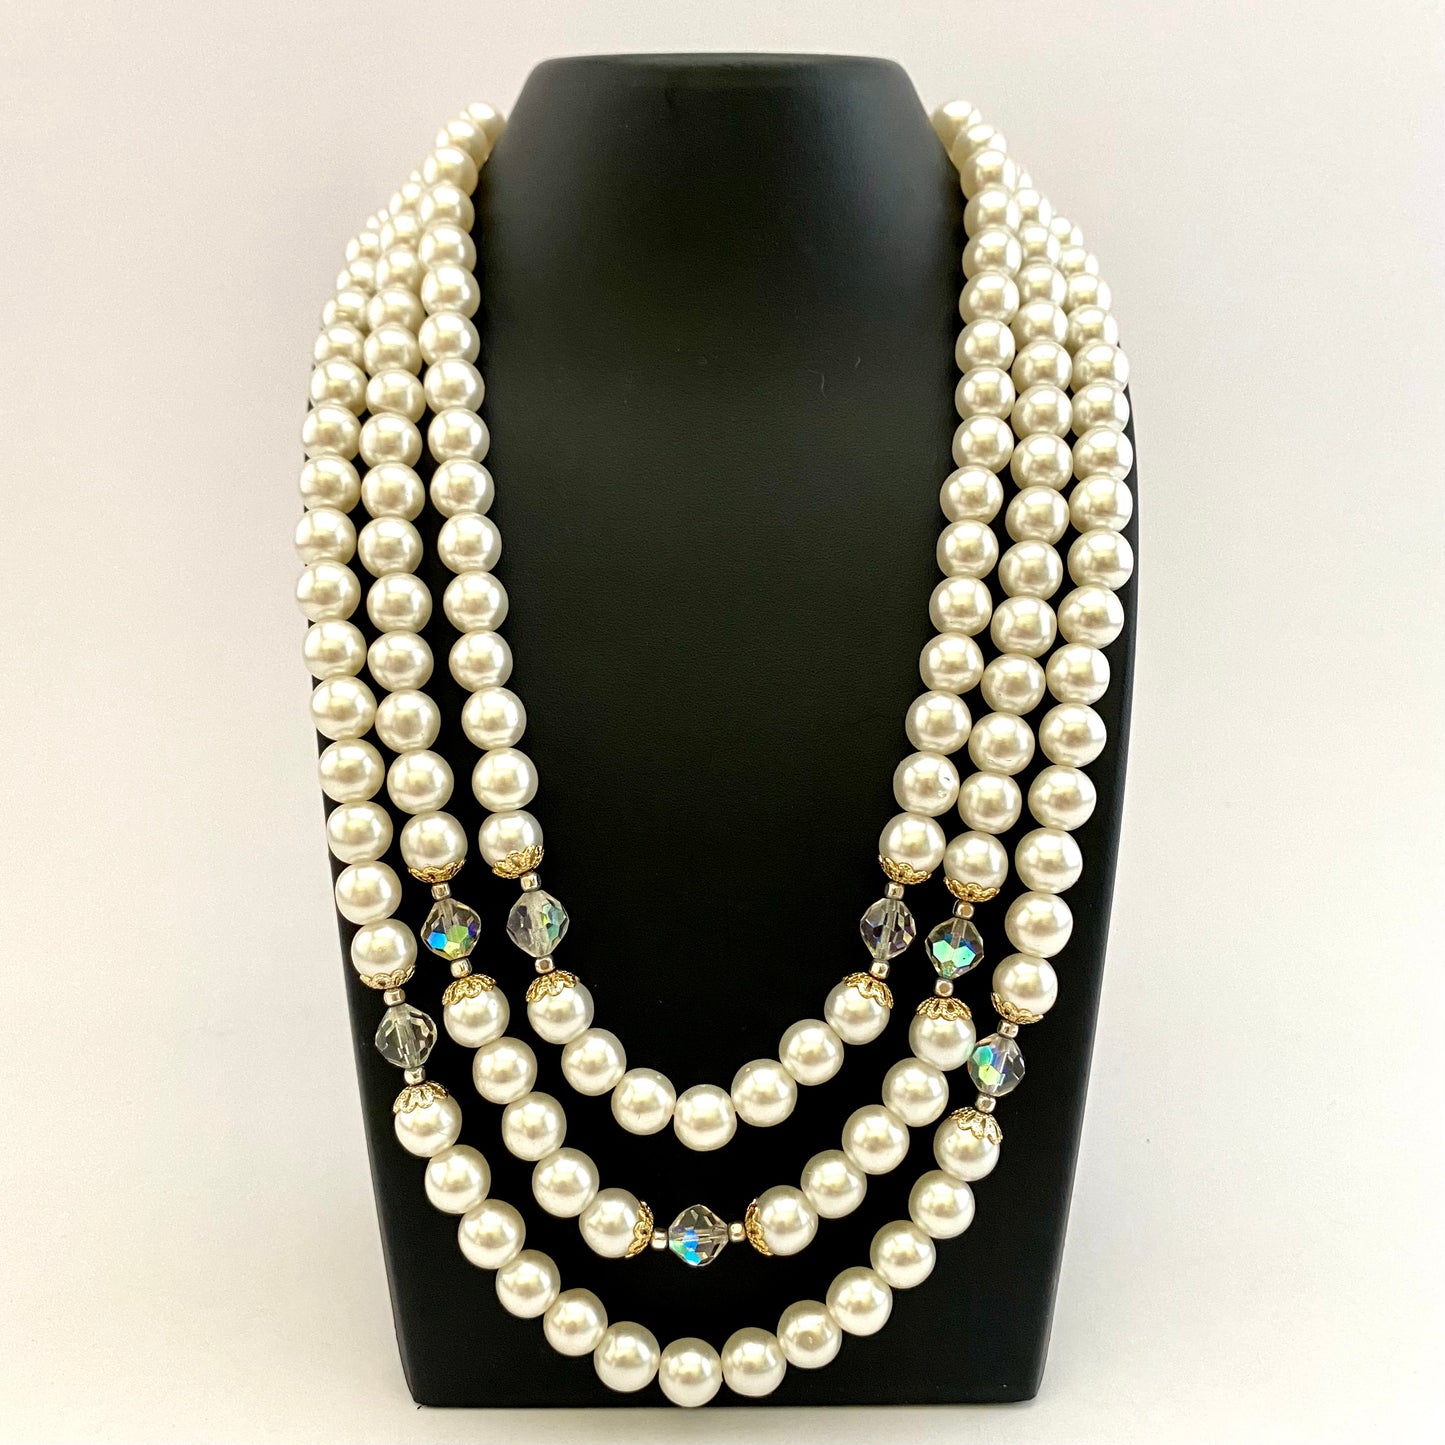 1960s Japan Faux Pearl & Crystal Bead Necklace